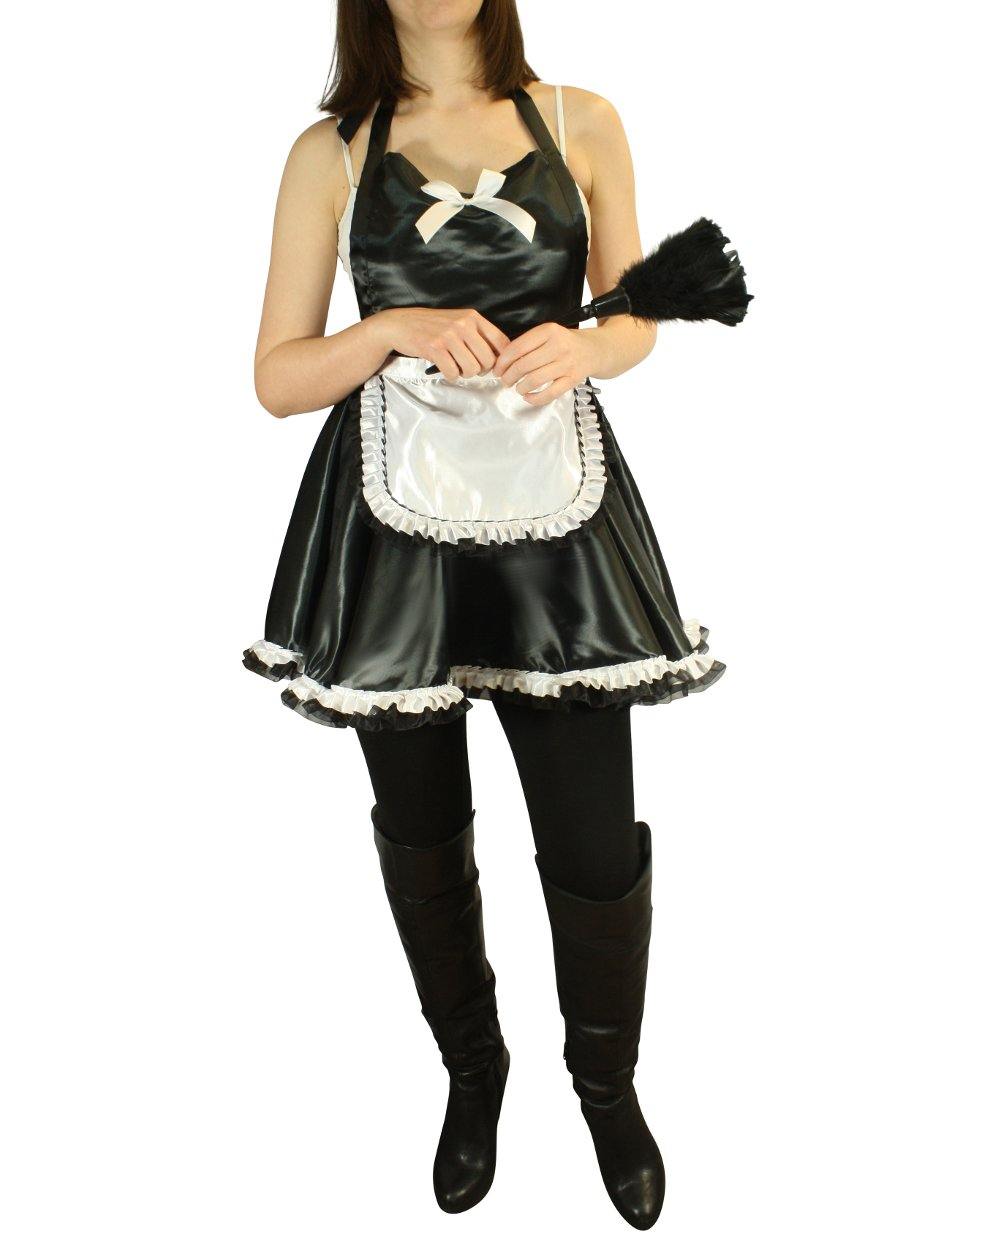 Buy Sexy Lingerie The French Maid Apron by Tipsy Totes – Winding